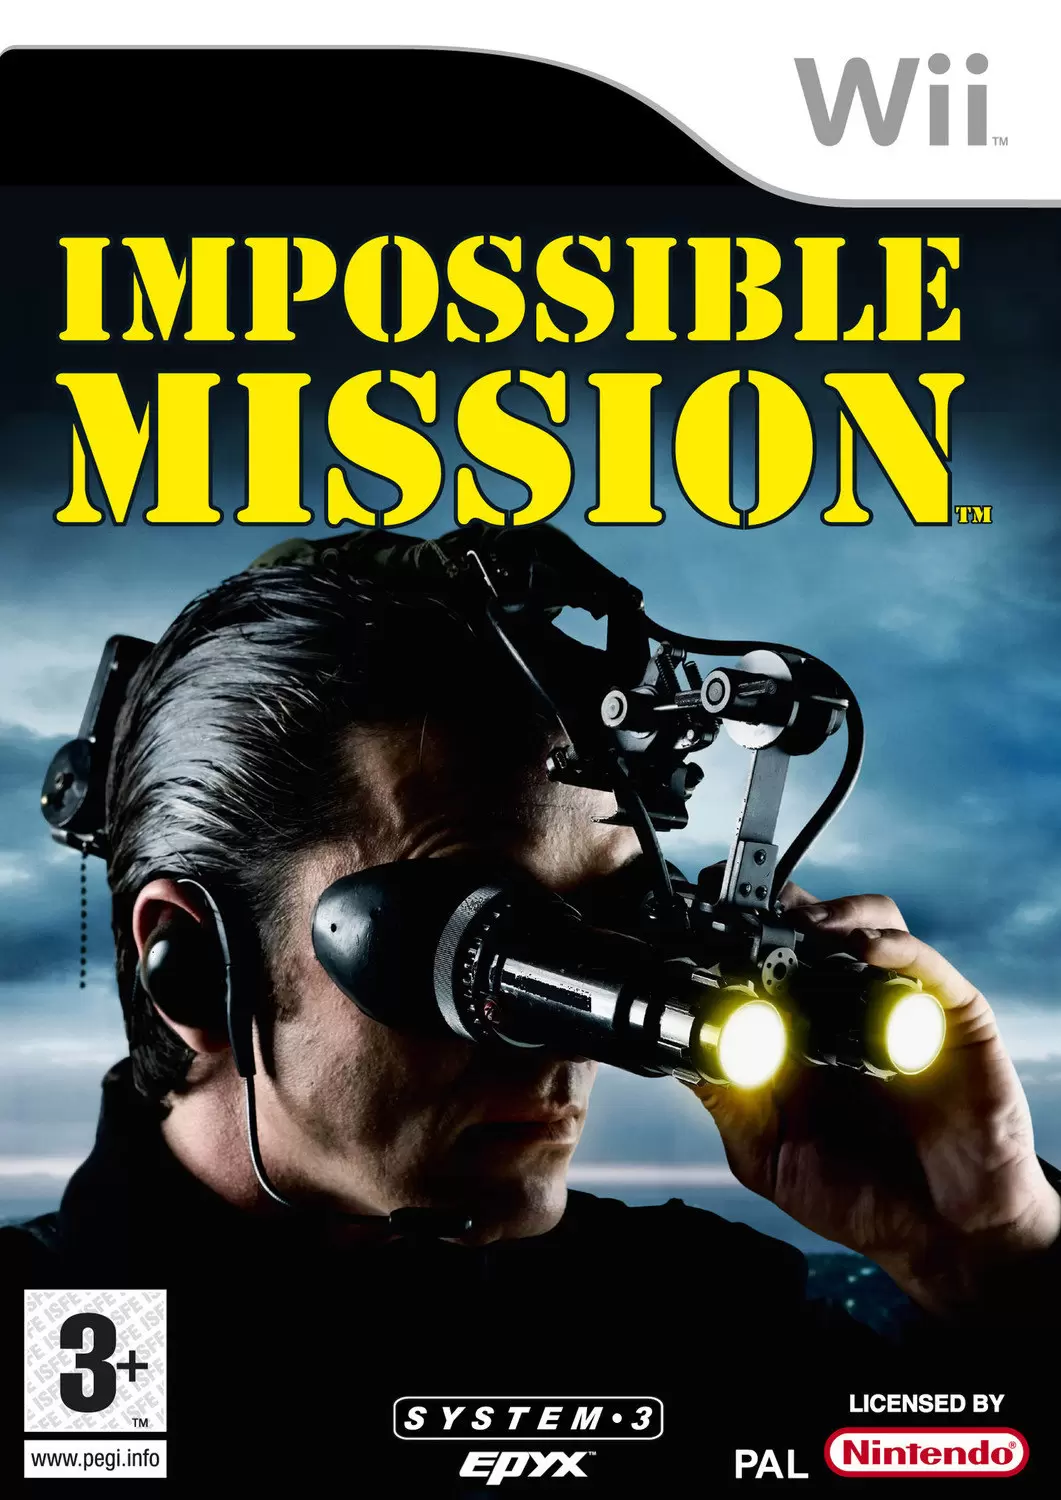 Nintendo Wii Games - Impossible Mission